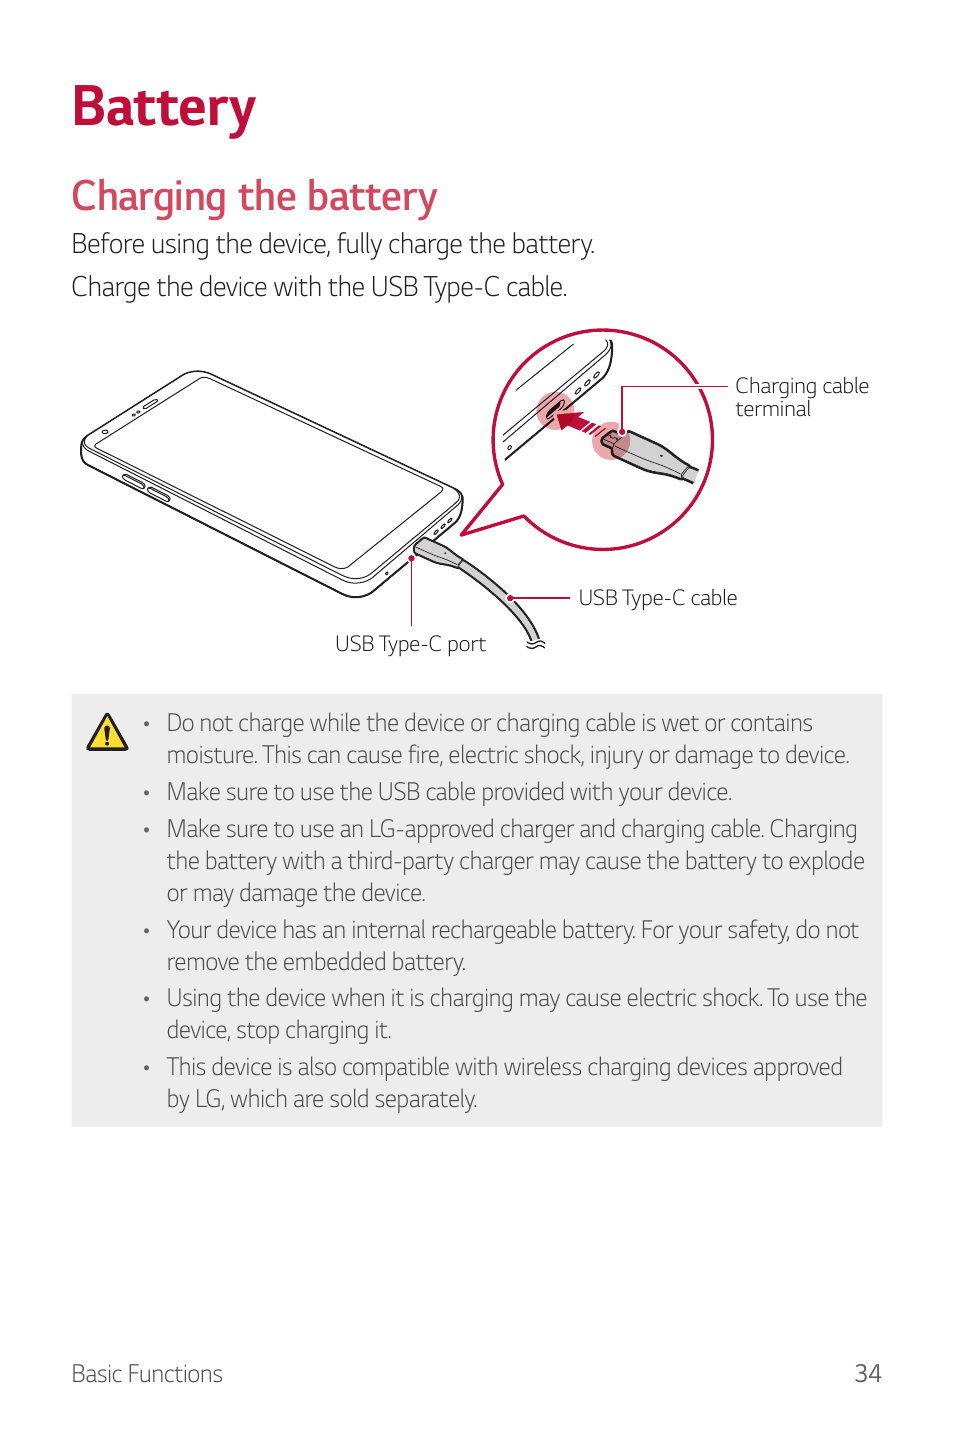 Battery, Charging the battery | LG G6 H872 User Manual | Page 35 / 183